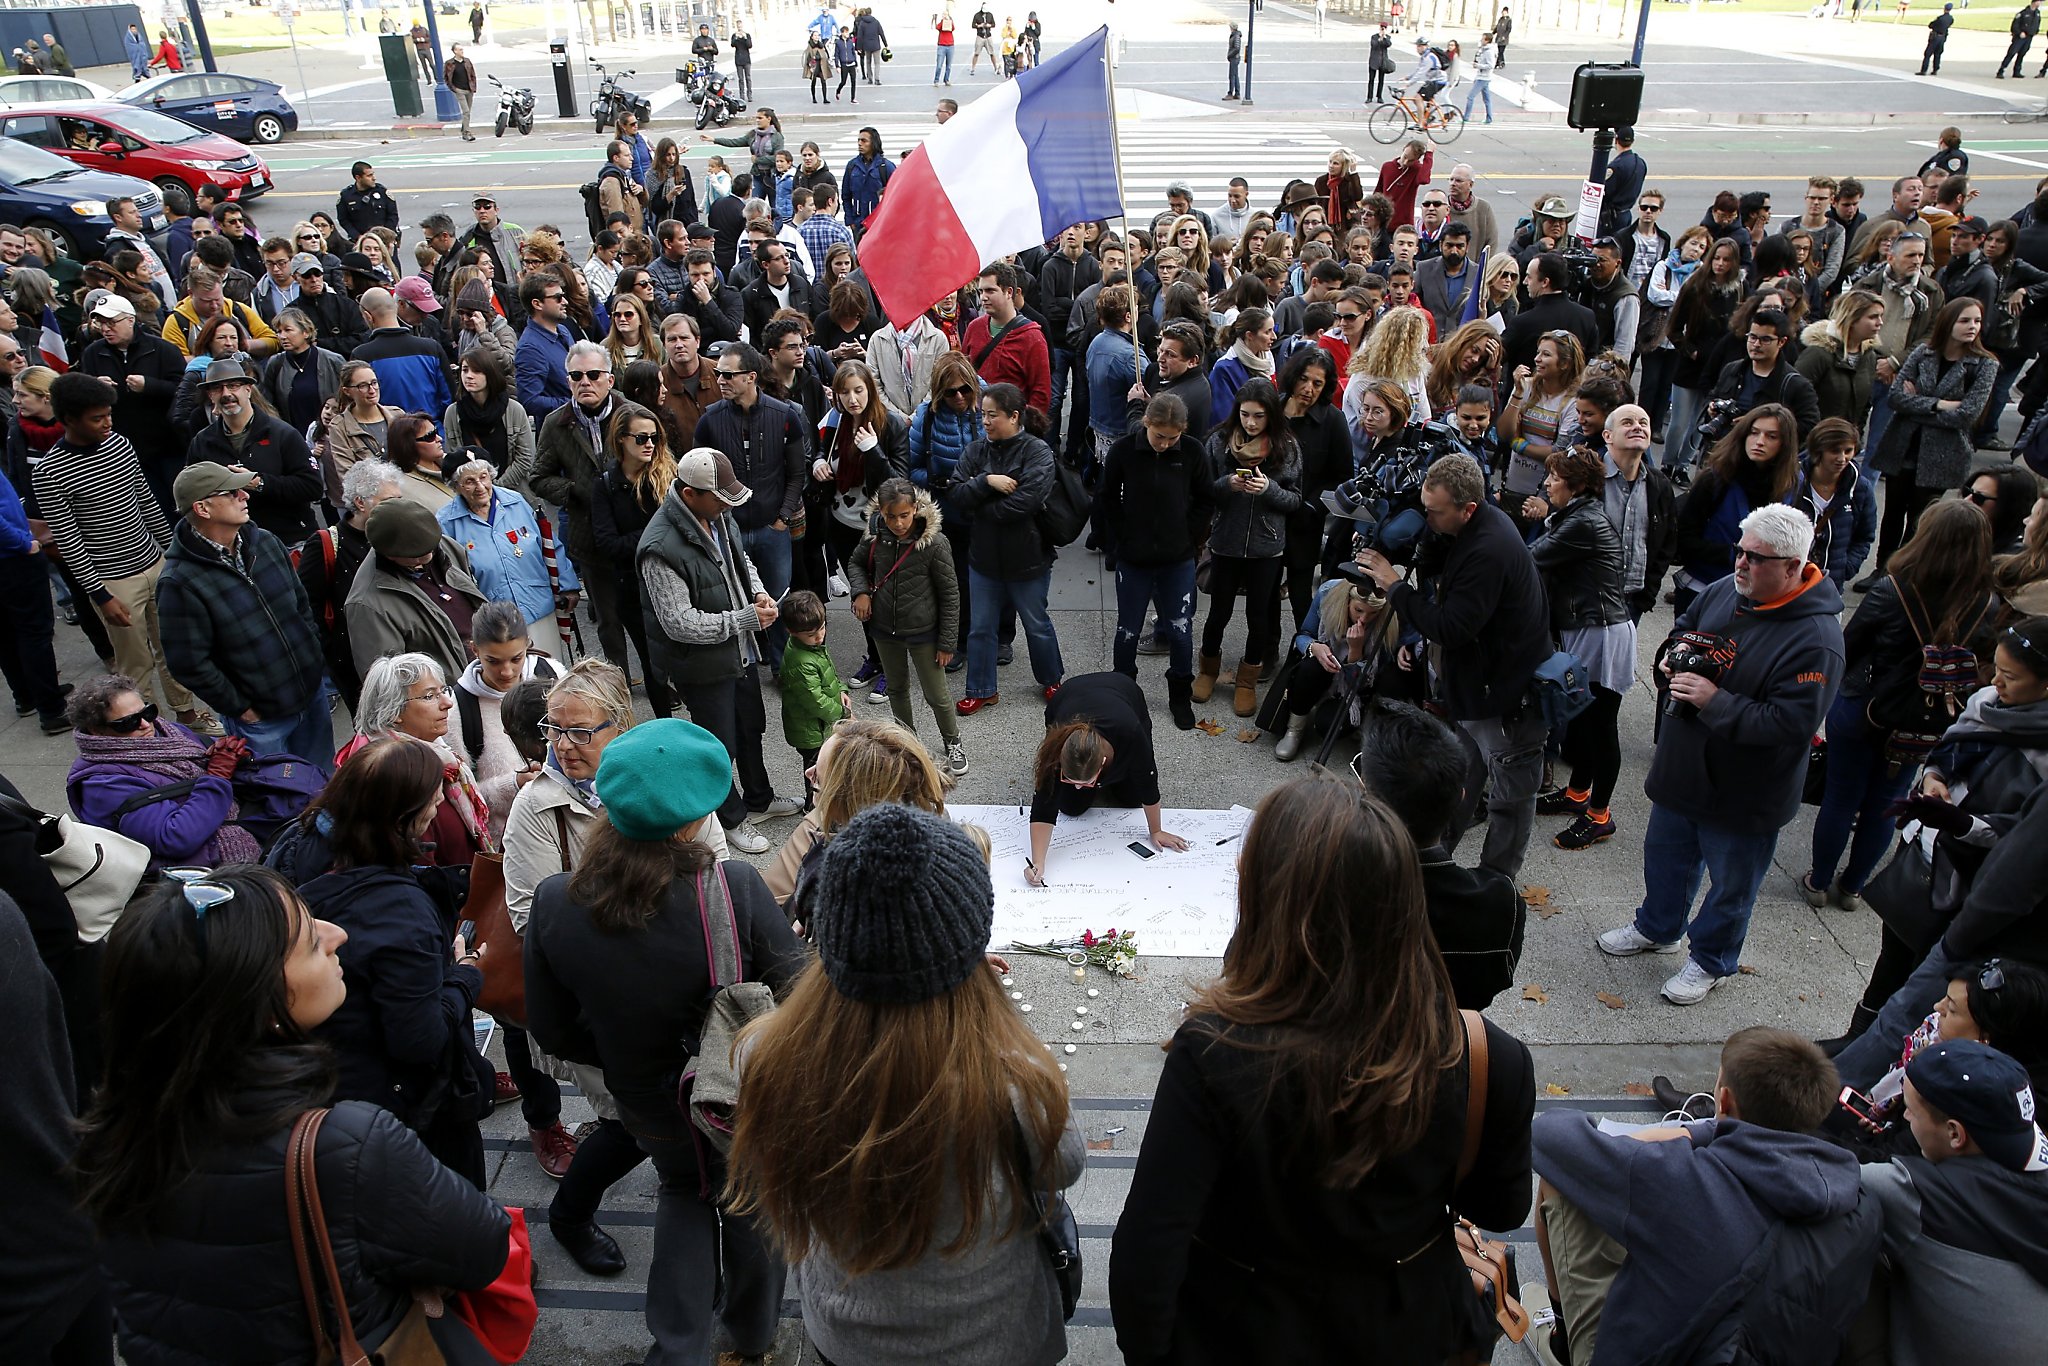 Paris attack victims mourned at S.F. City Hall gathering - SFChronicle.com